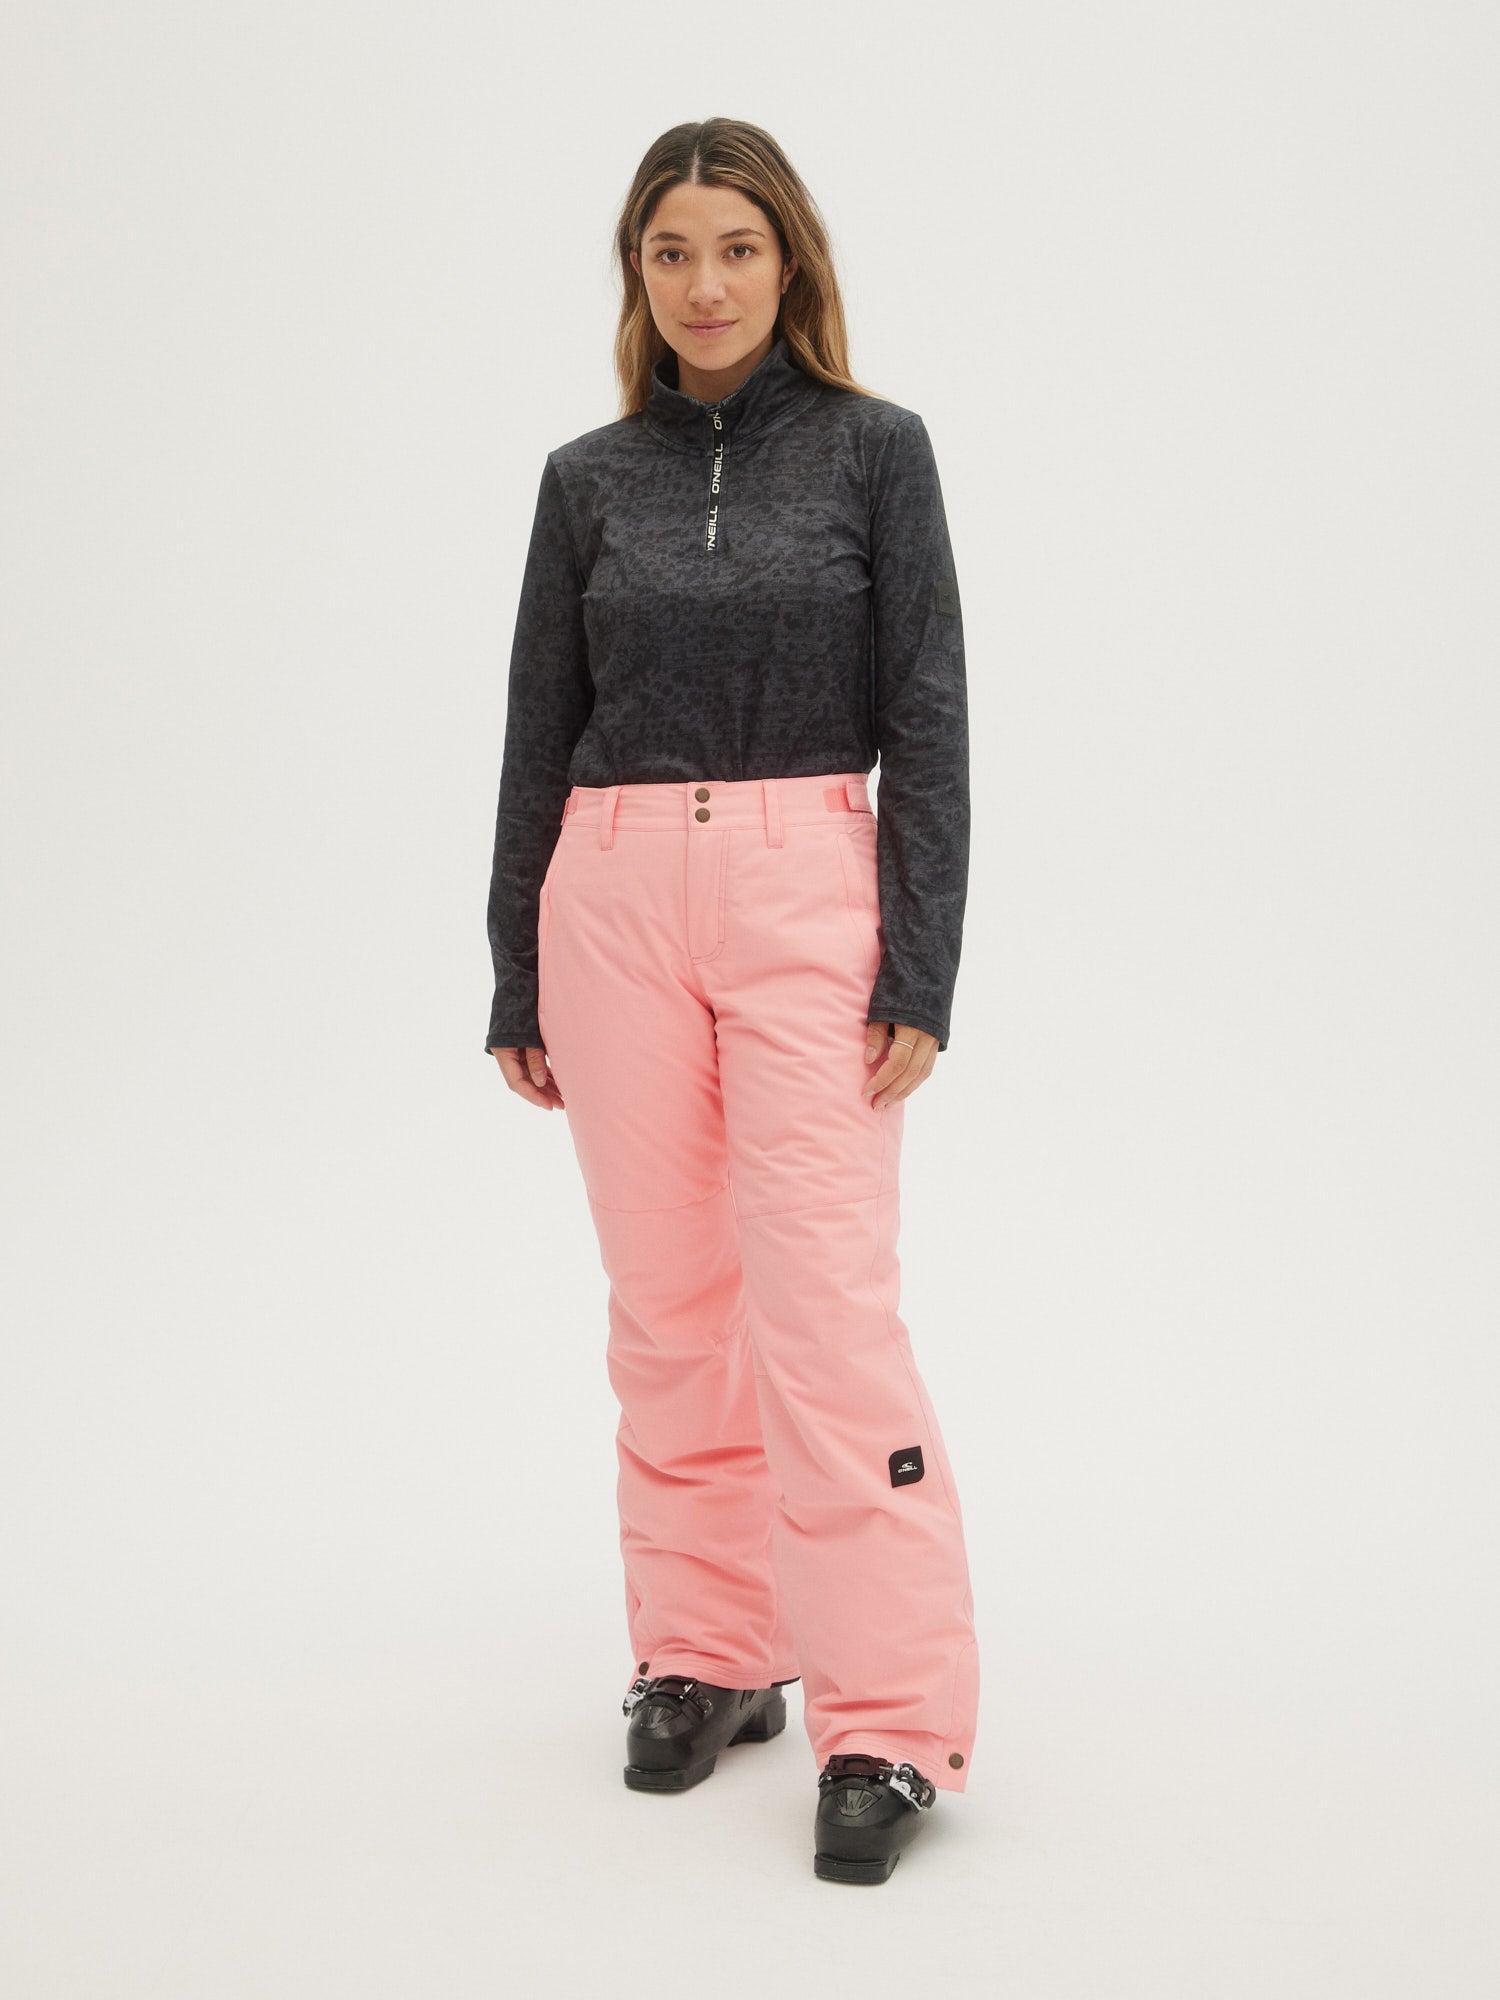 Buy Women's Star Slim Snow Pants - Peach Whip by O'Neill online